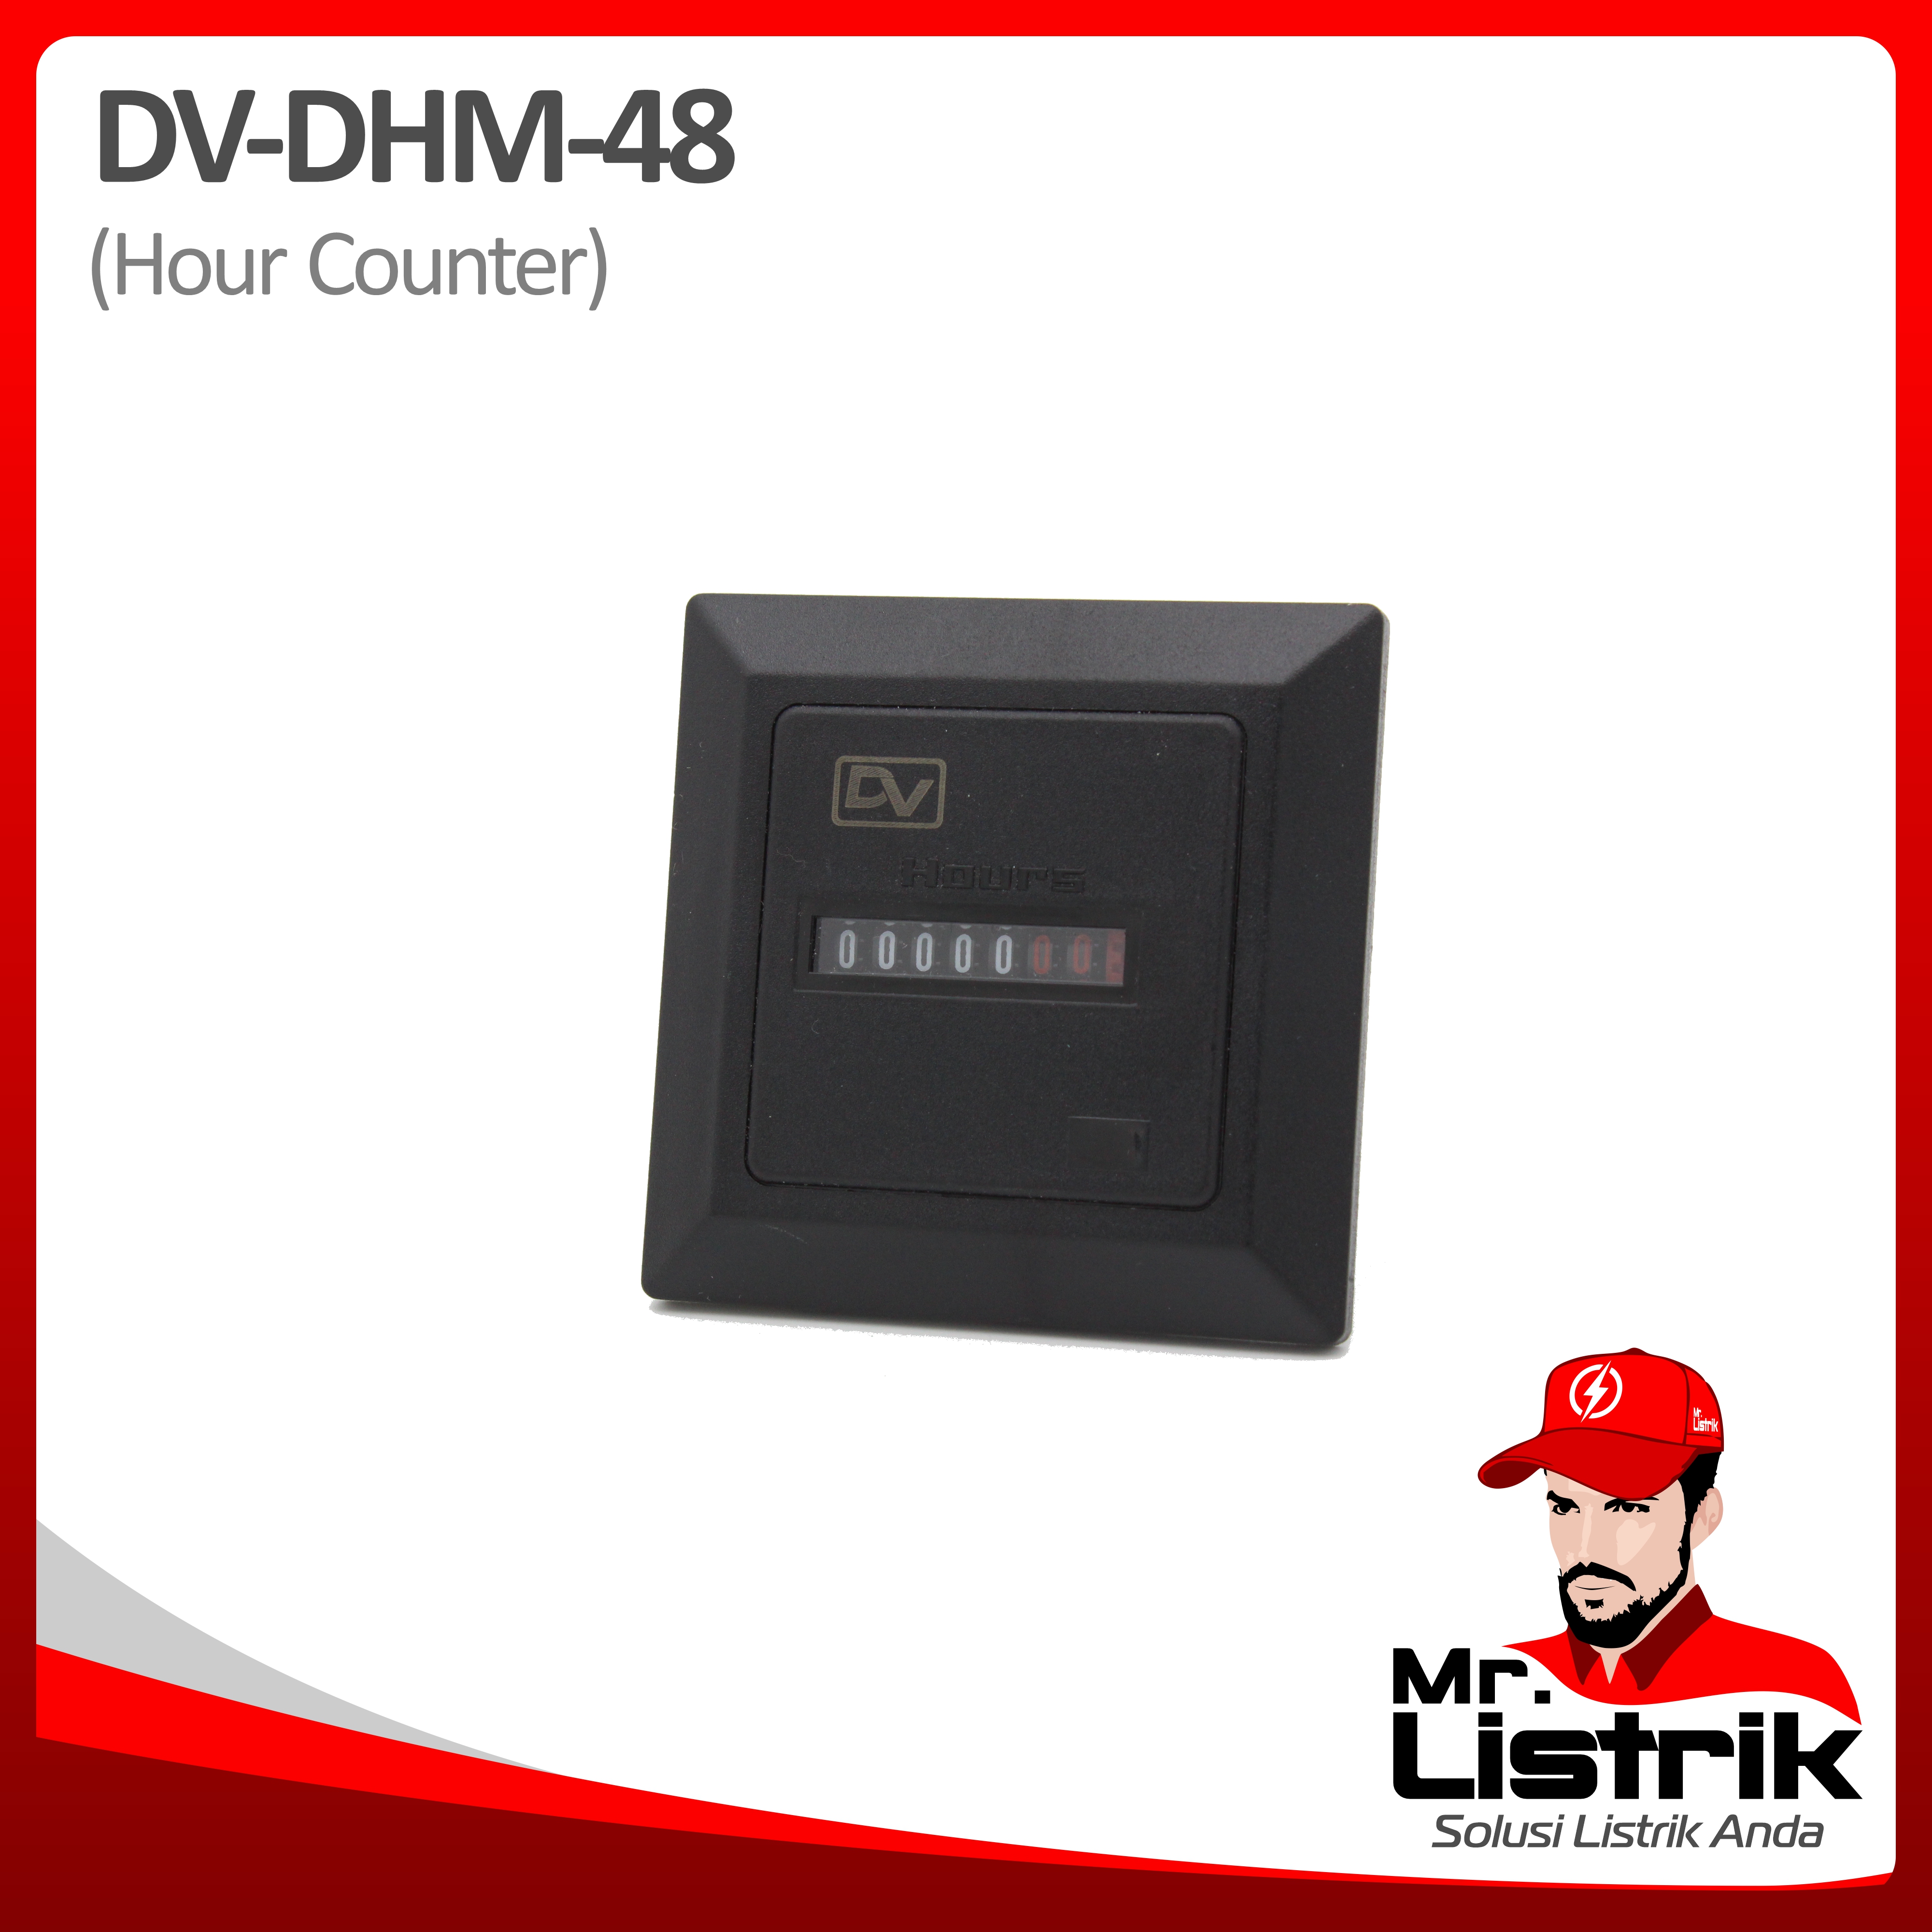 Hour Counter DV DHM-48